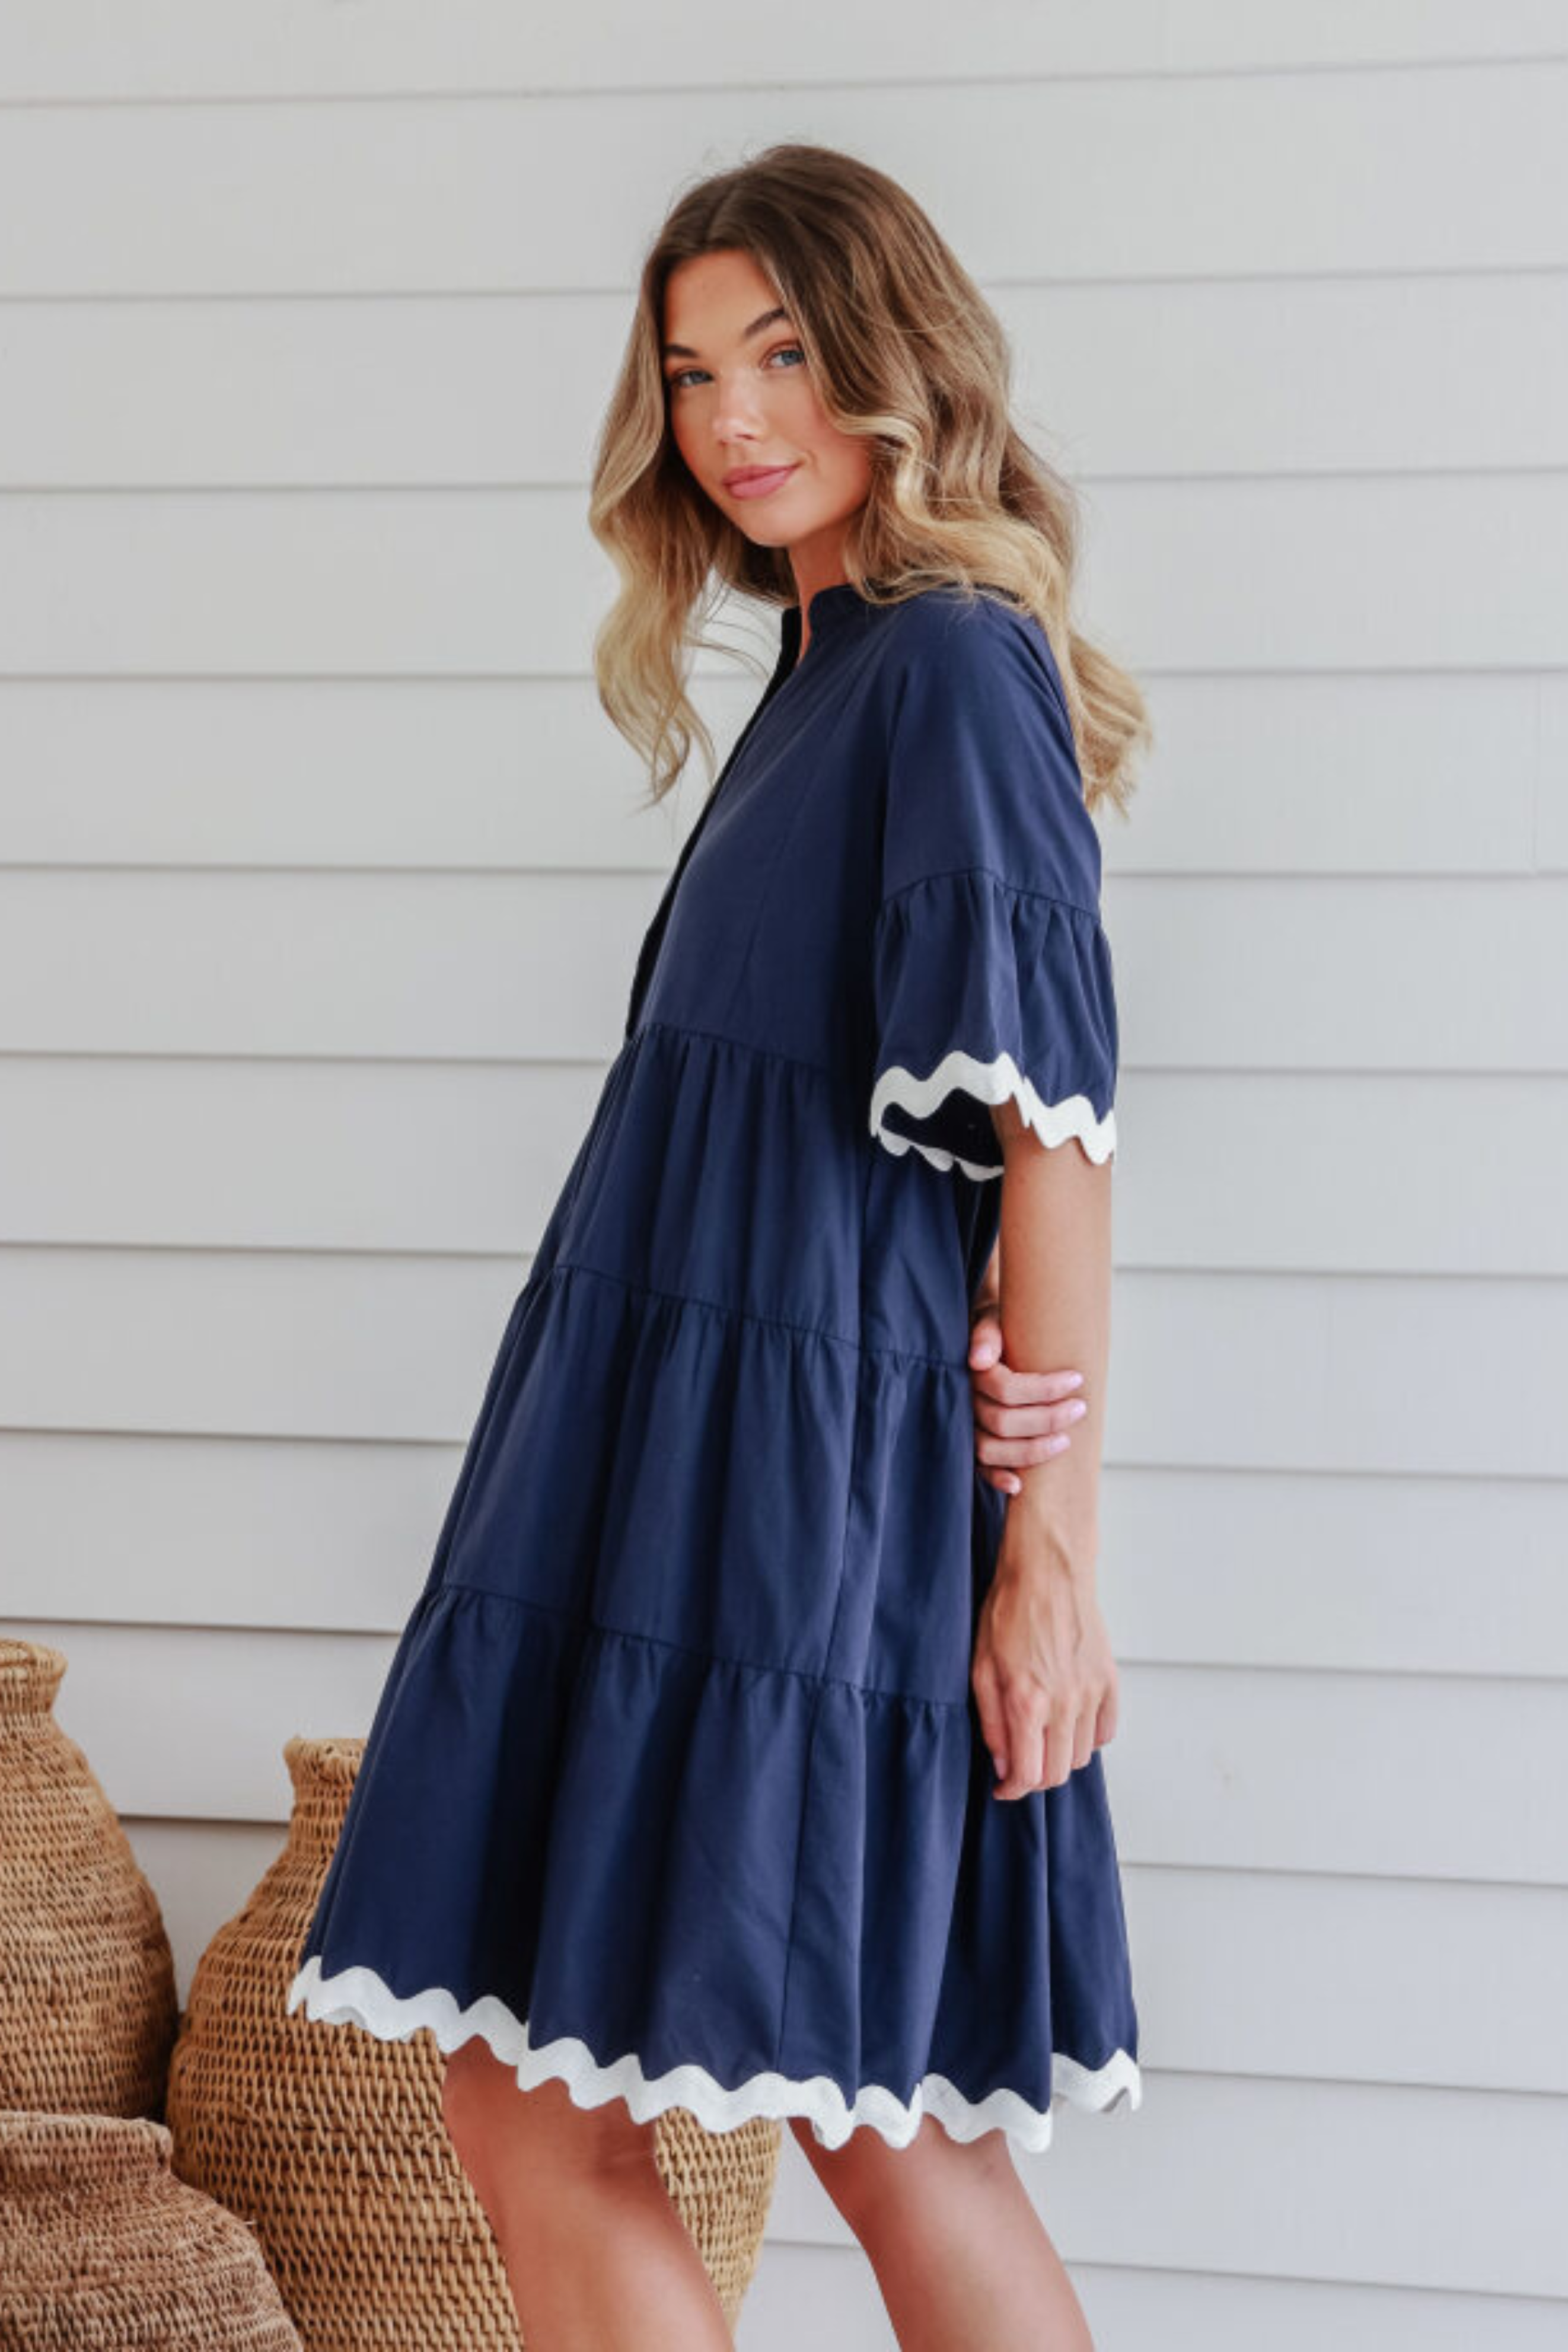 ABIGAIL Dress in Navy and White